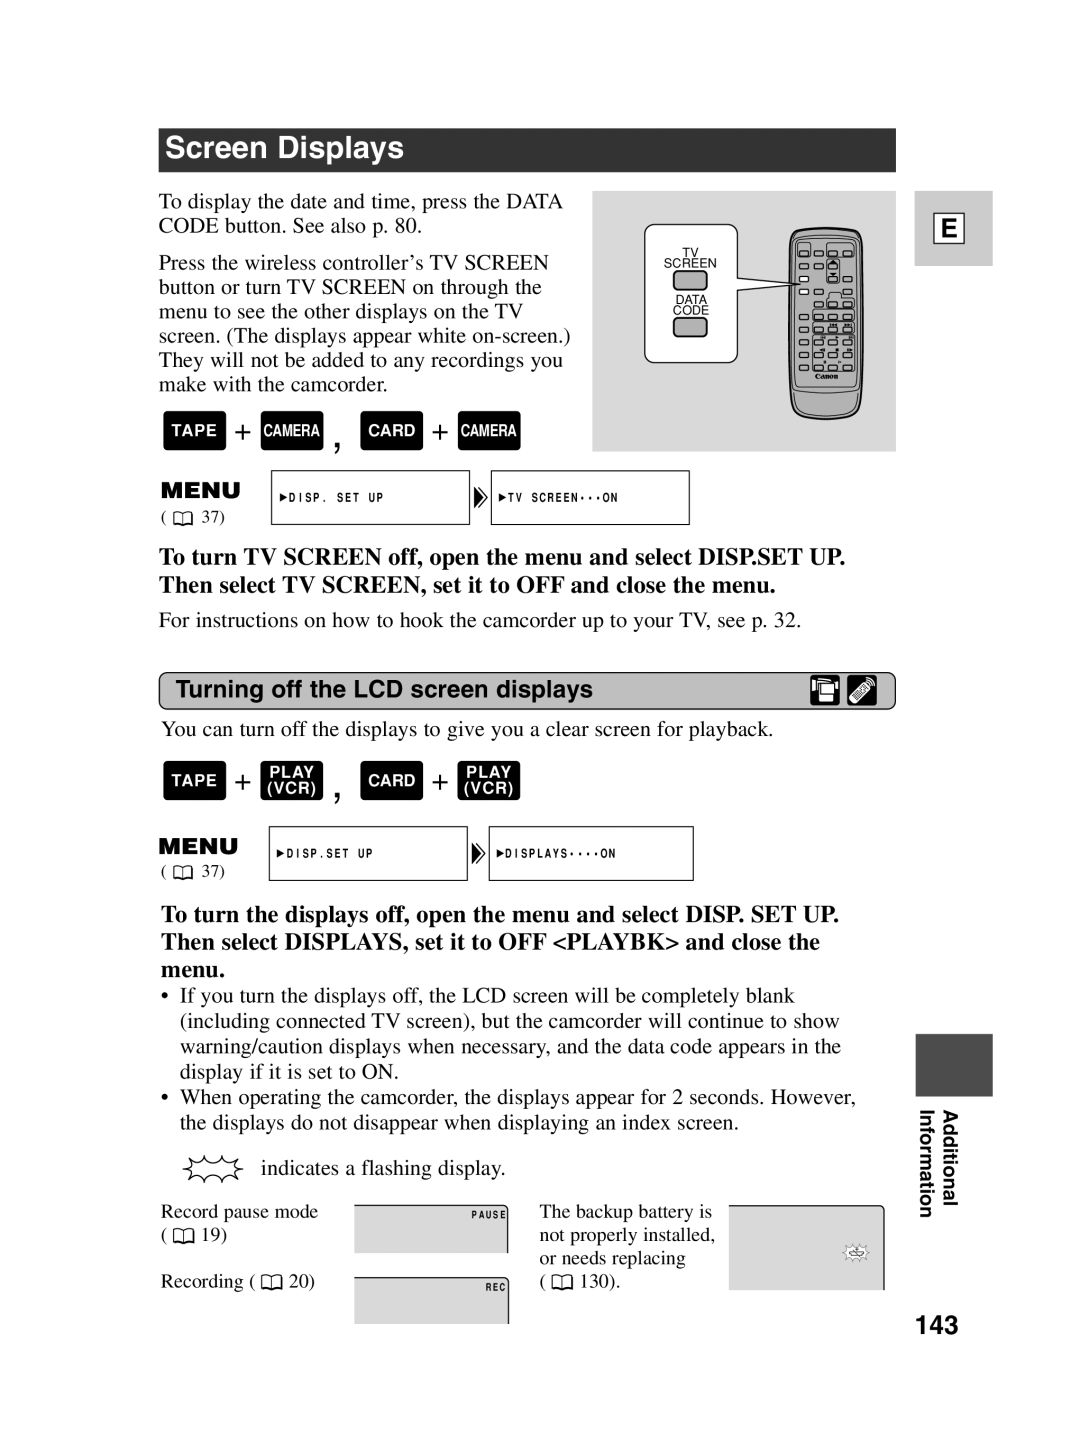 Canon Optura 100 instruction manual Screen Displays, 143, Turning off the LCD screen displays 